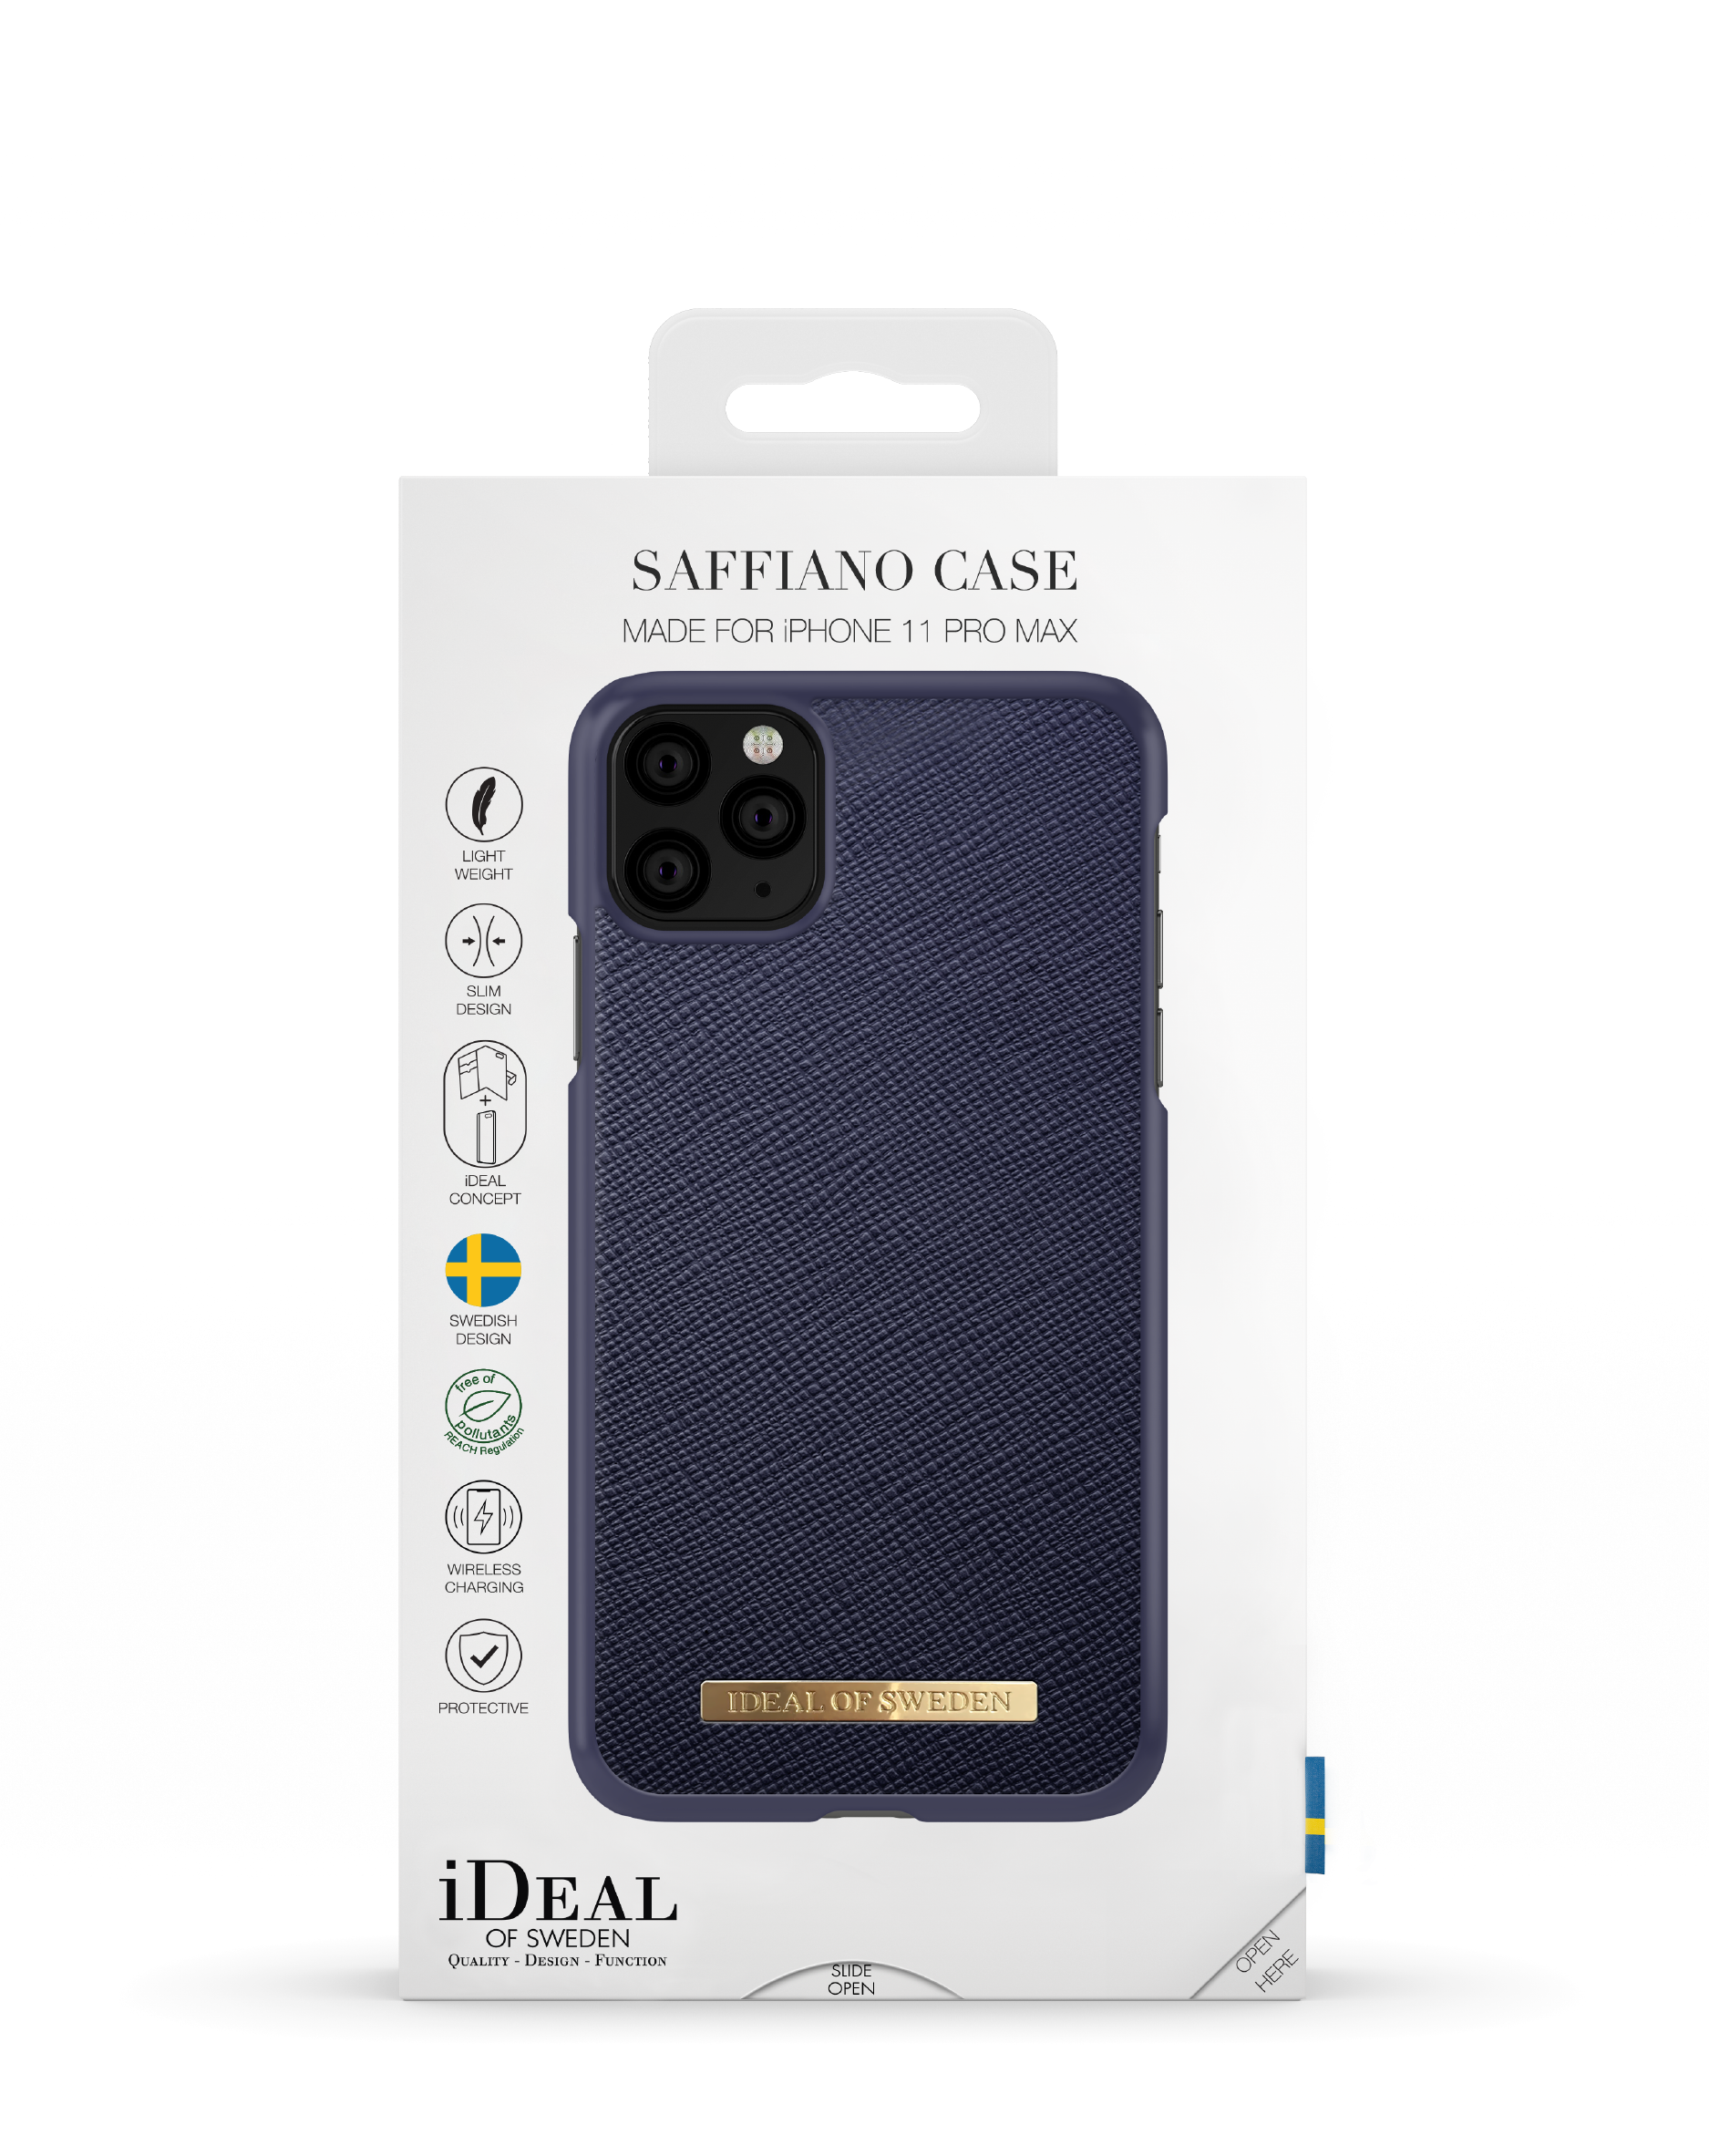 IDEAL OF Navy Max, SWEDEN Max, IDFCSA-I1965-50, Apple Apple, Apple Backcover, iPhone Pro XS iPhone 11